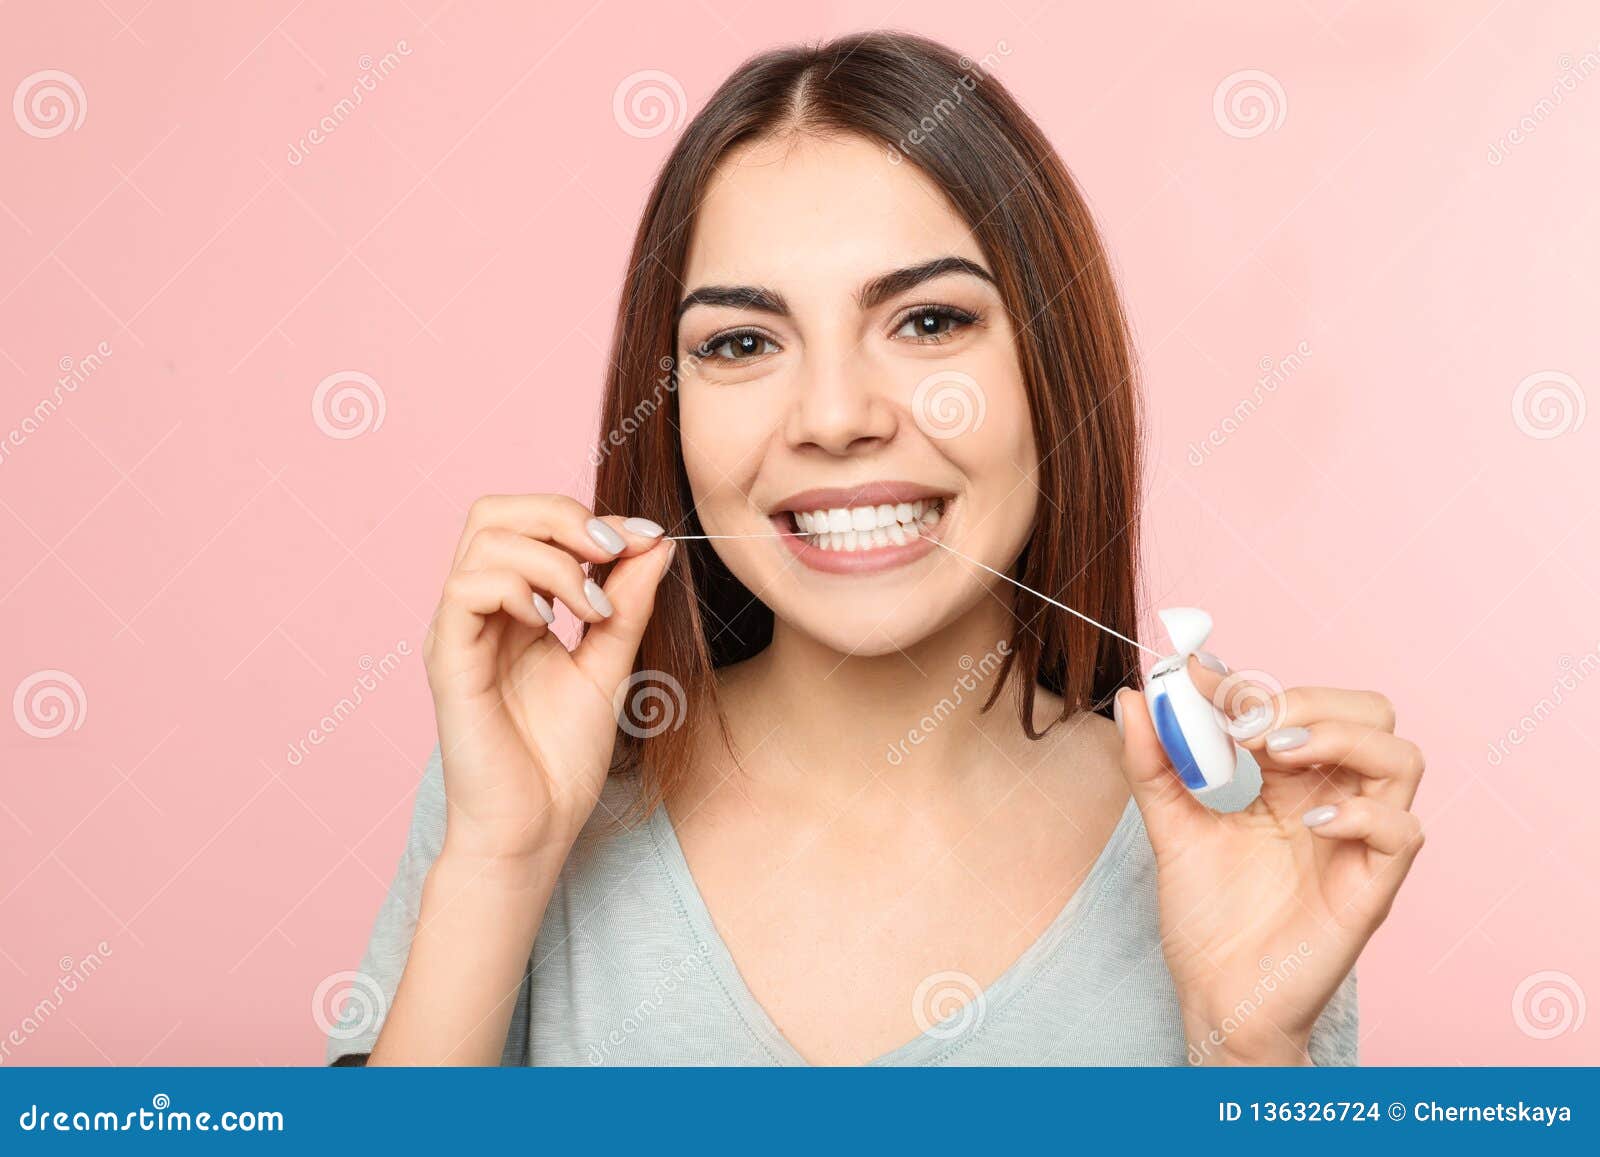 young woman flossing teeth